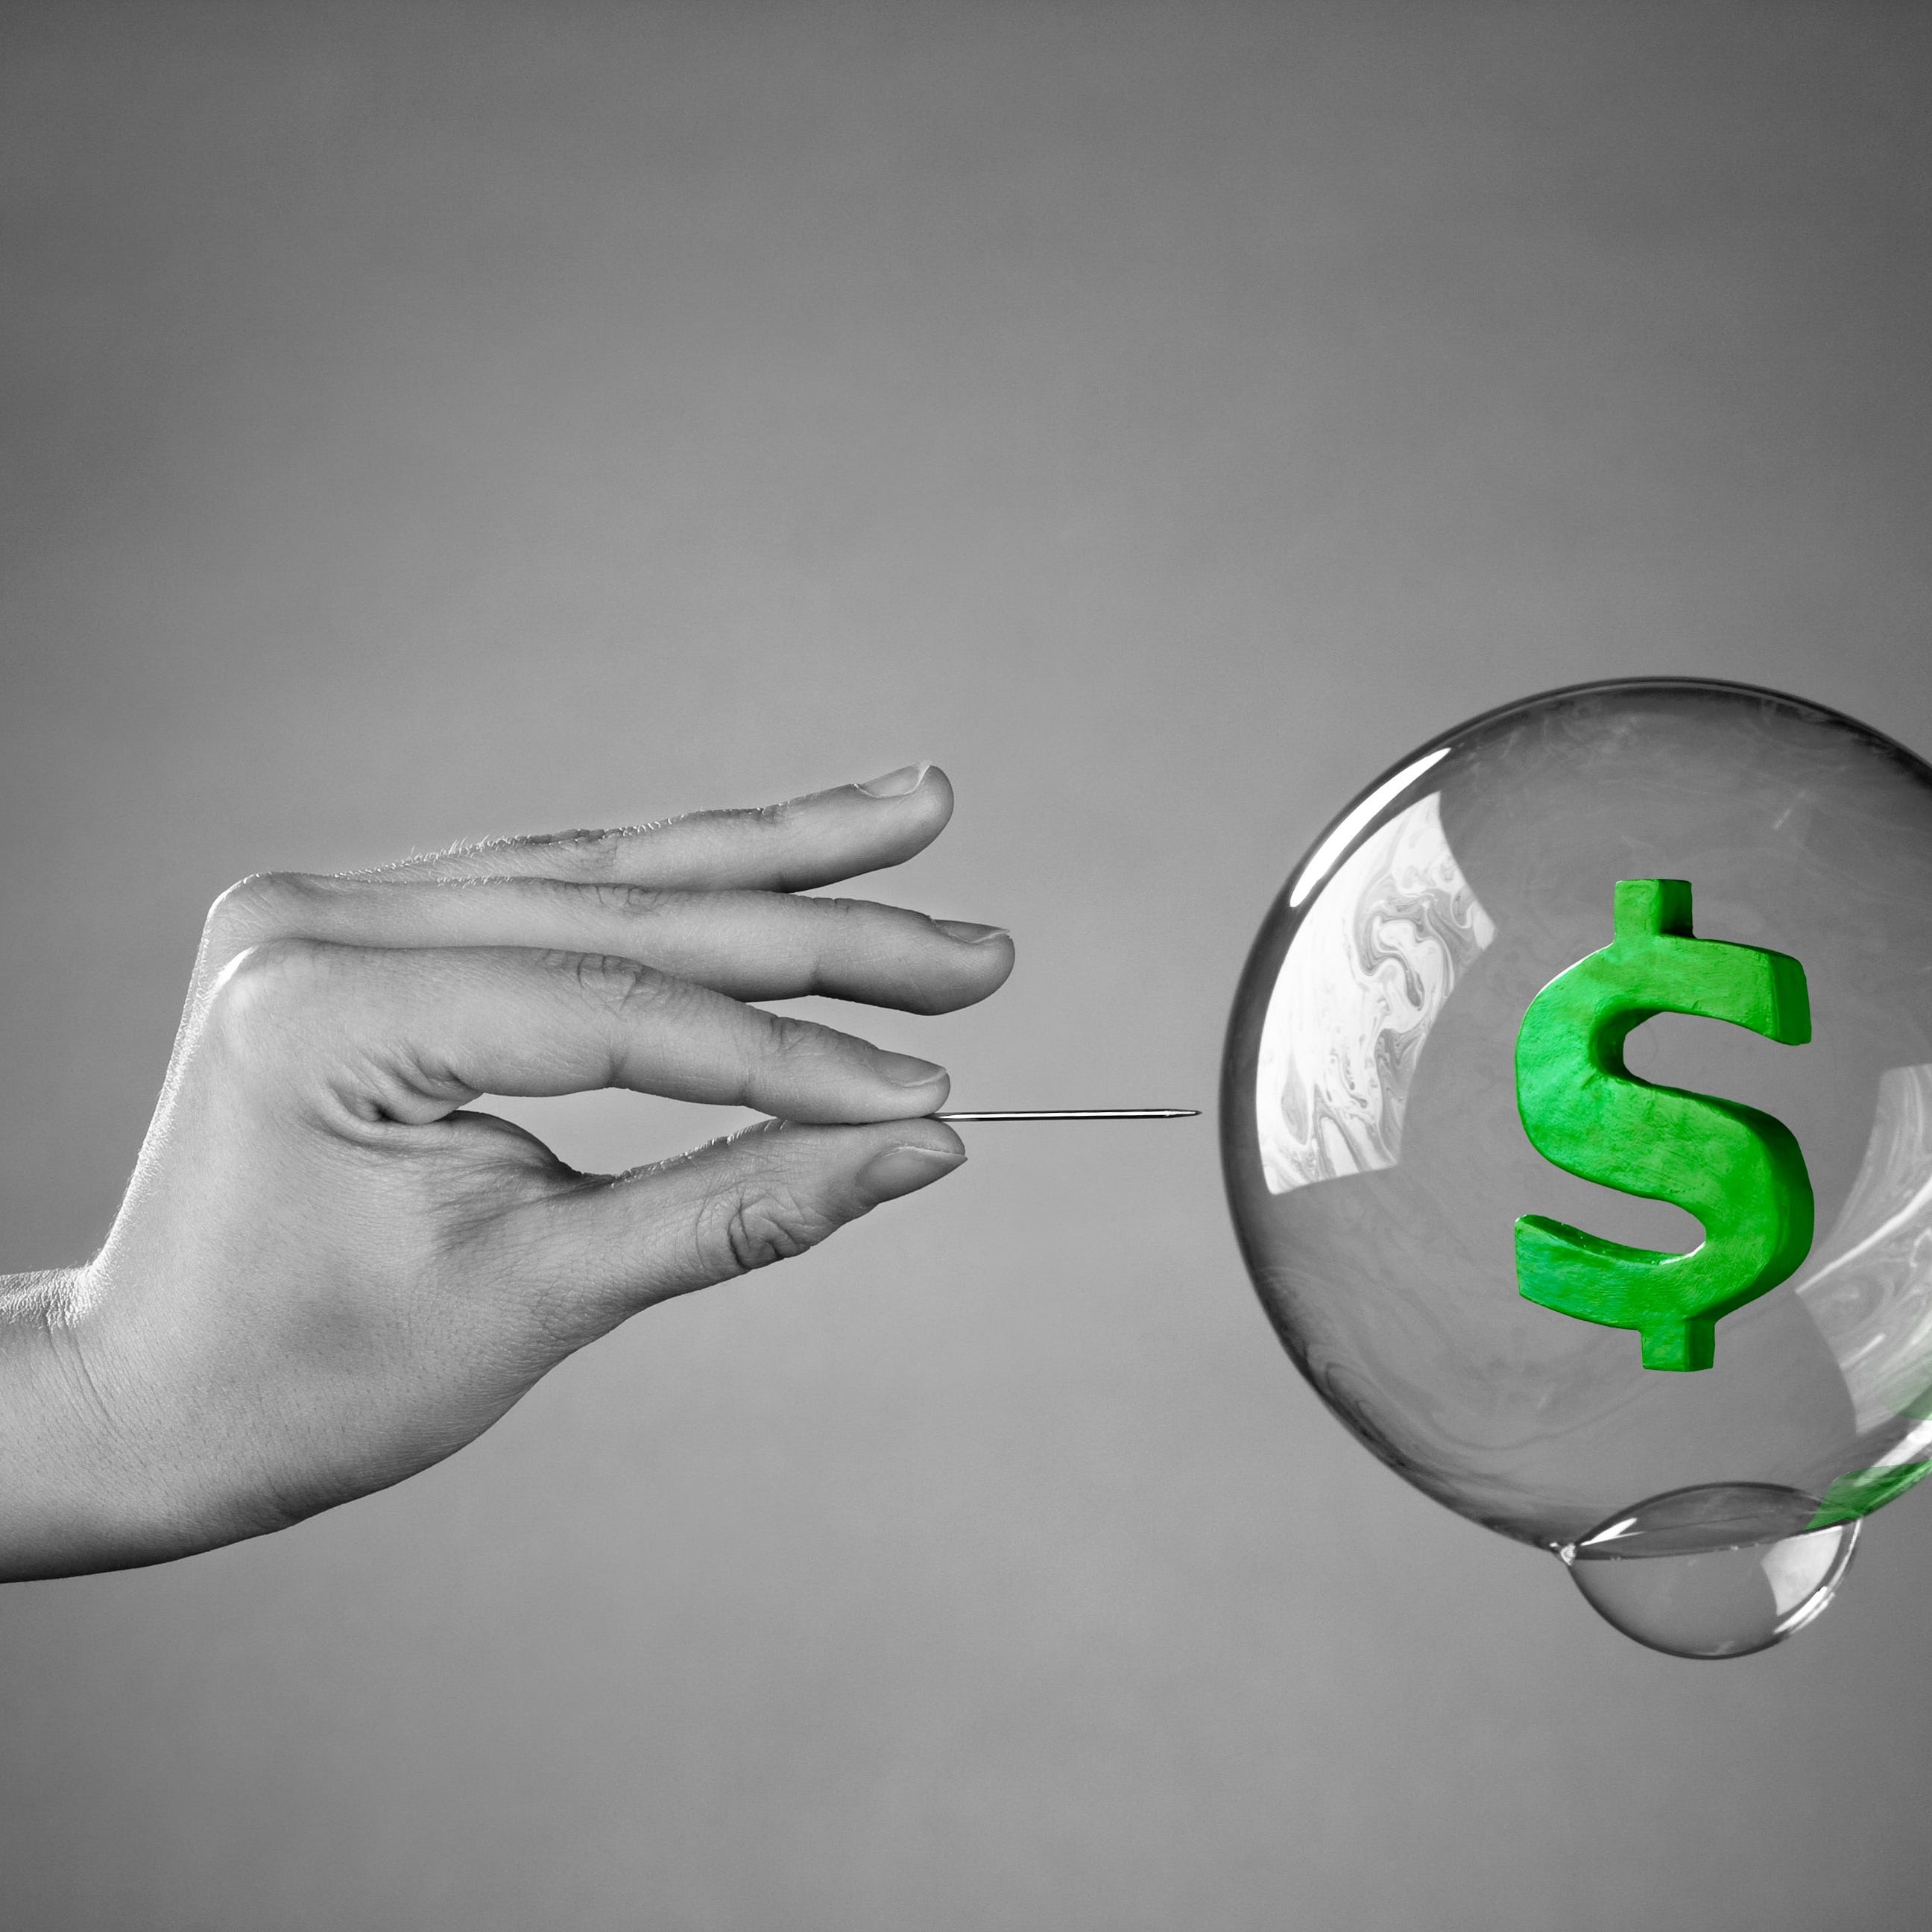 A soap bubble with a dollar sign in it about to be popped by a hand holding a pin.